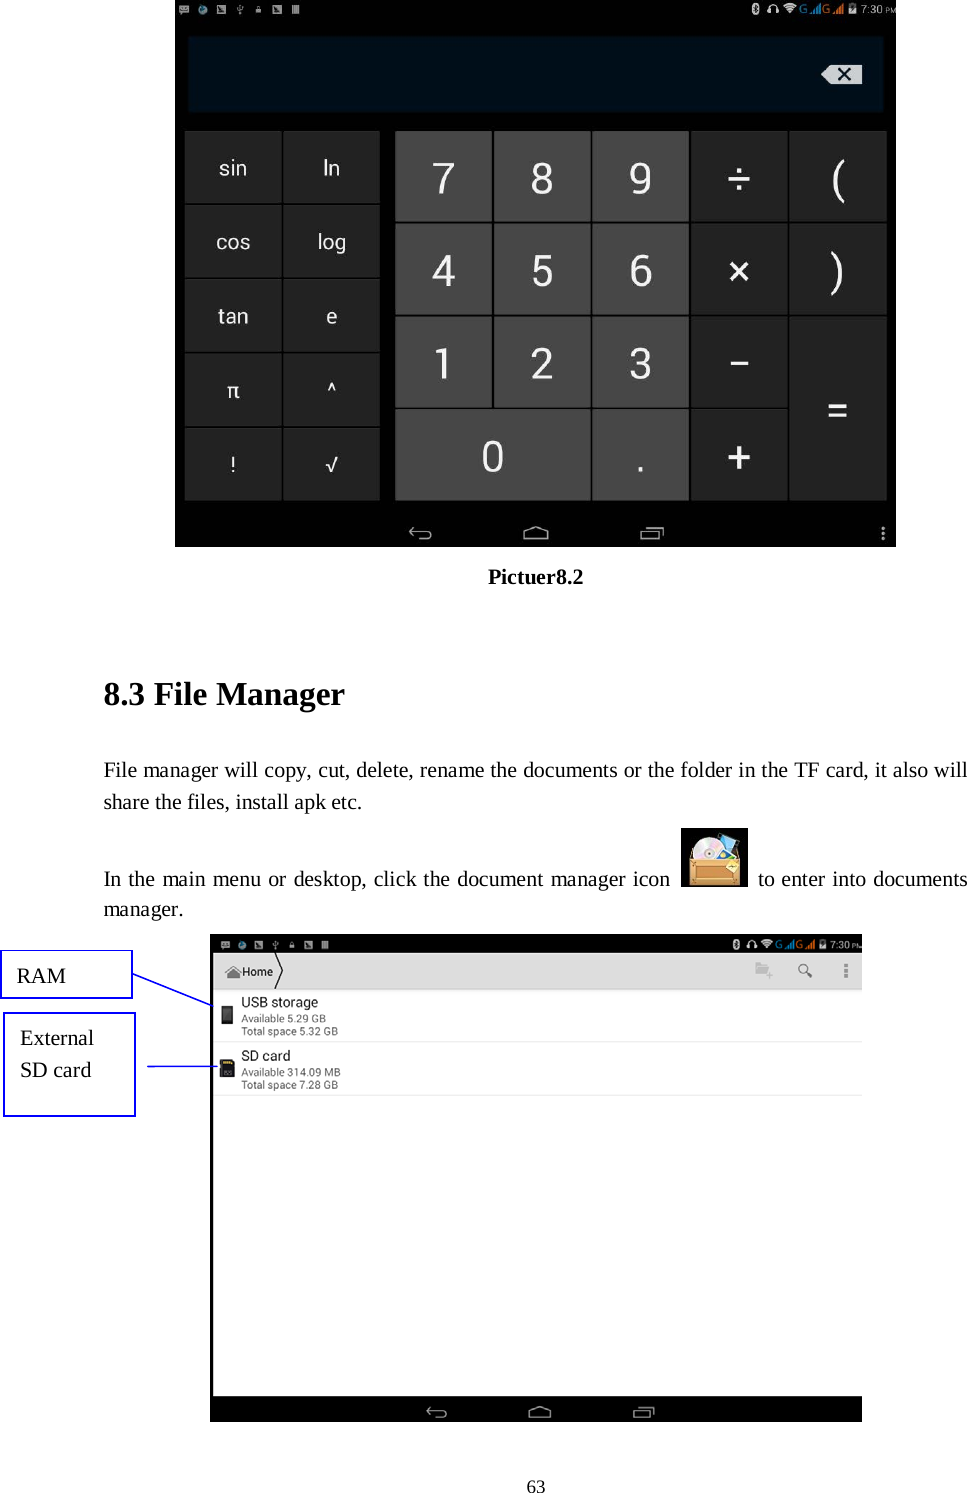      63  Pictuer8.2  8.3 File Manager File manager will copy, cut, delete, rename the documents or the folder in the TF card, it also will share the files, install apk etc. In the main menu or desktop, click the document manager icon   to enter into documents manager.  RAM  External SD card 